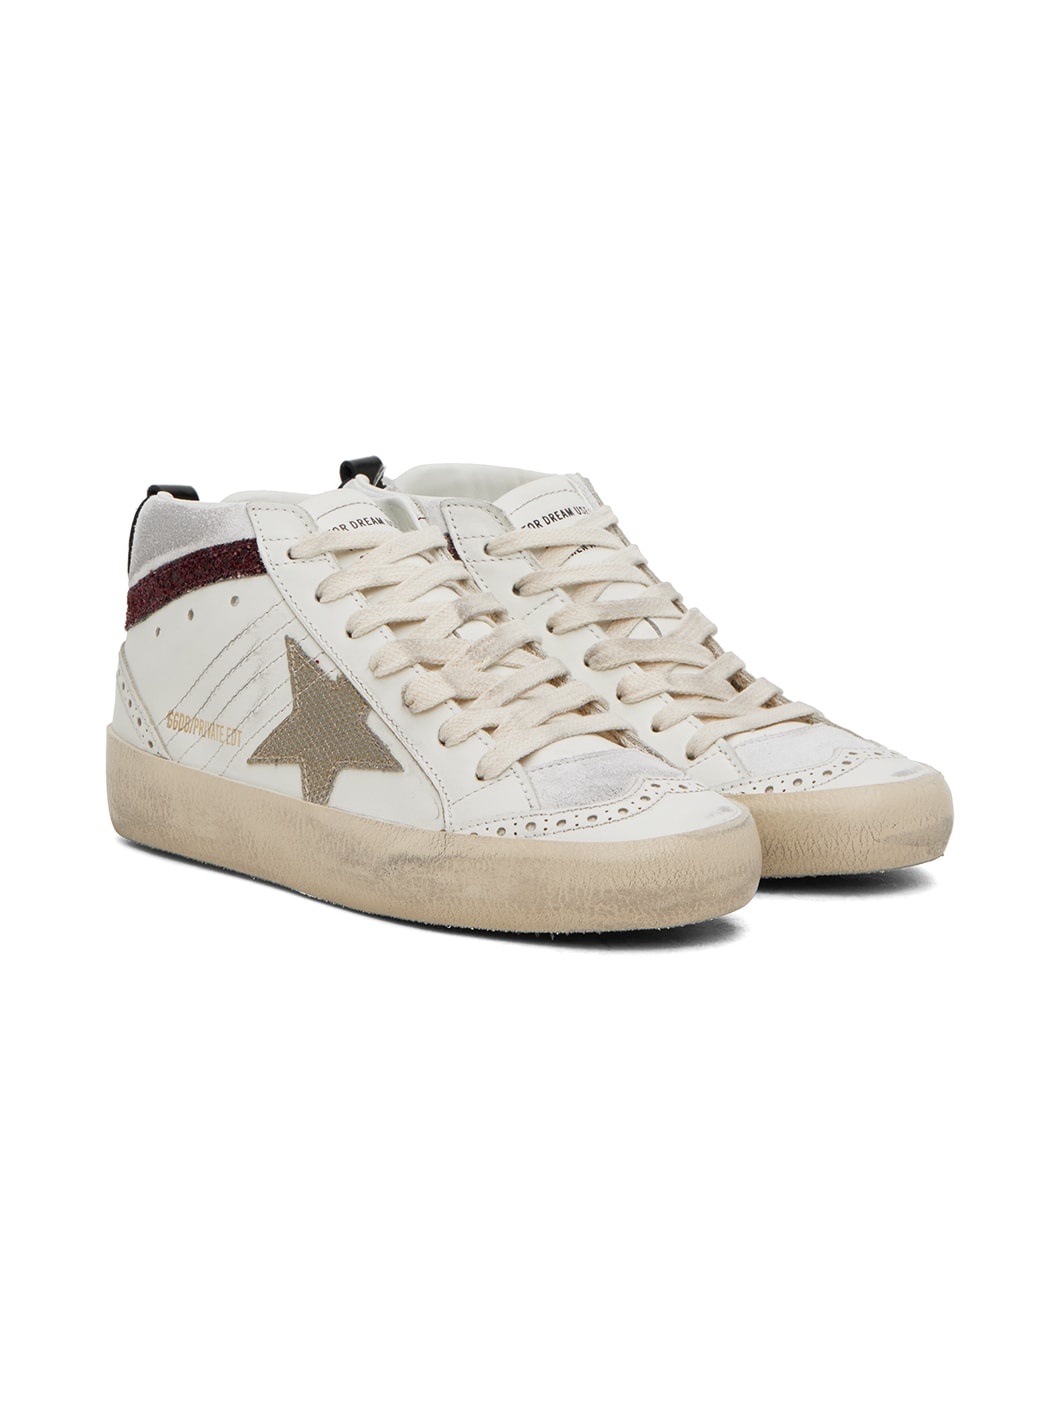 SSENSE Exclusive White Mid Star Sneakers - 4